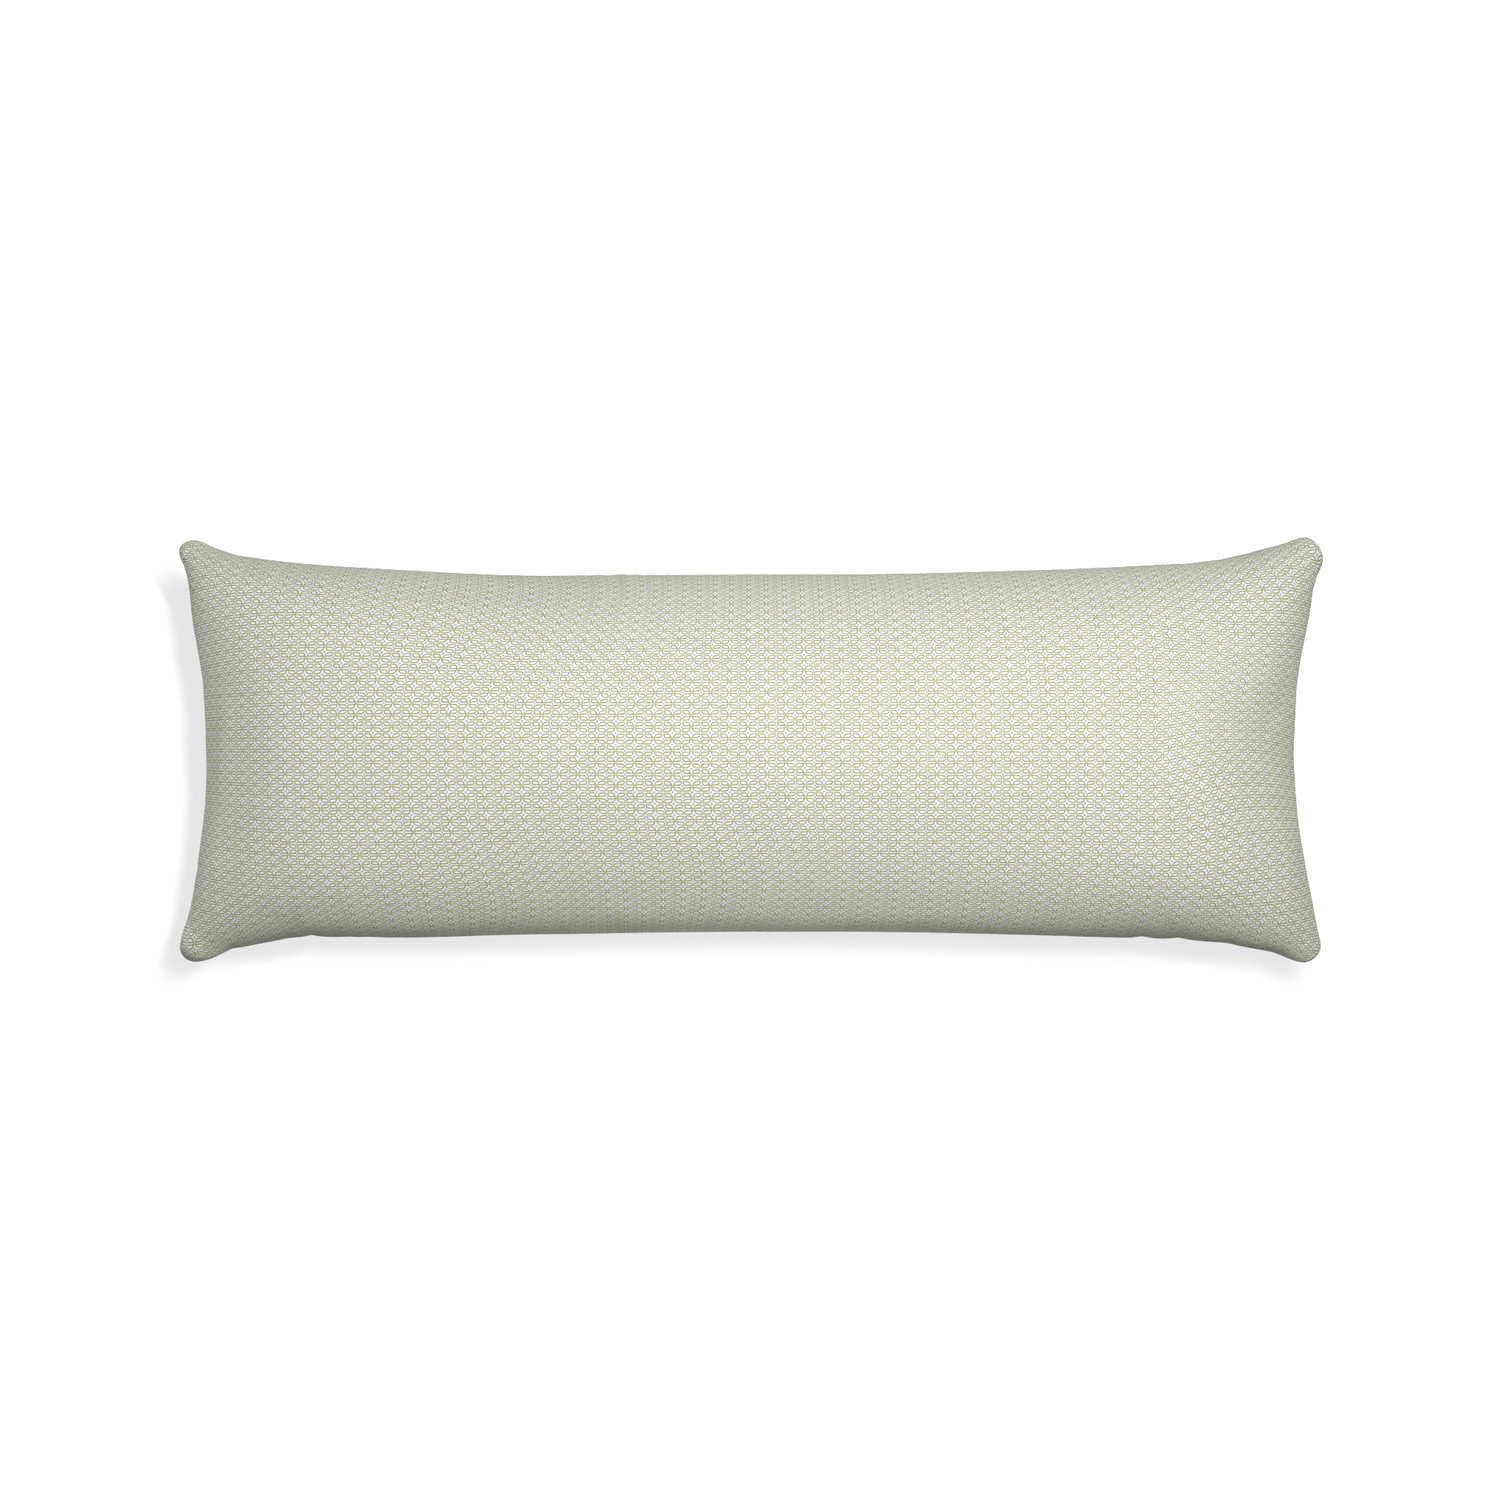 Xl-lumbar loomi moss custom pillow with none on white background